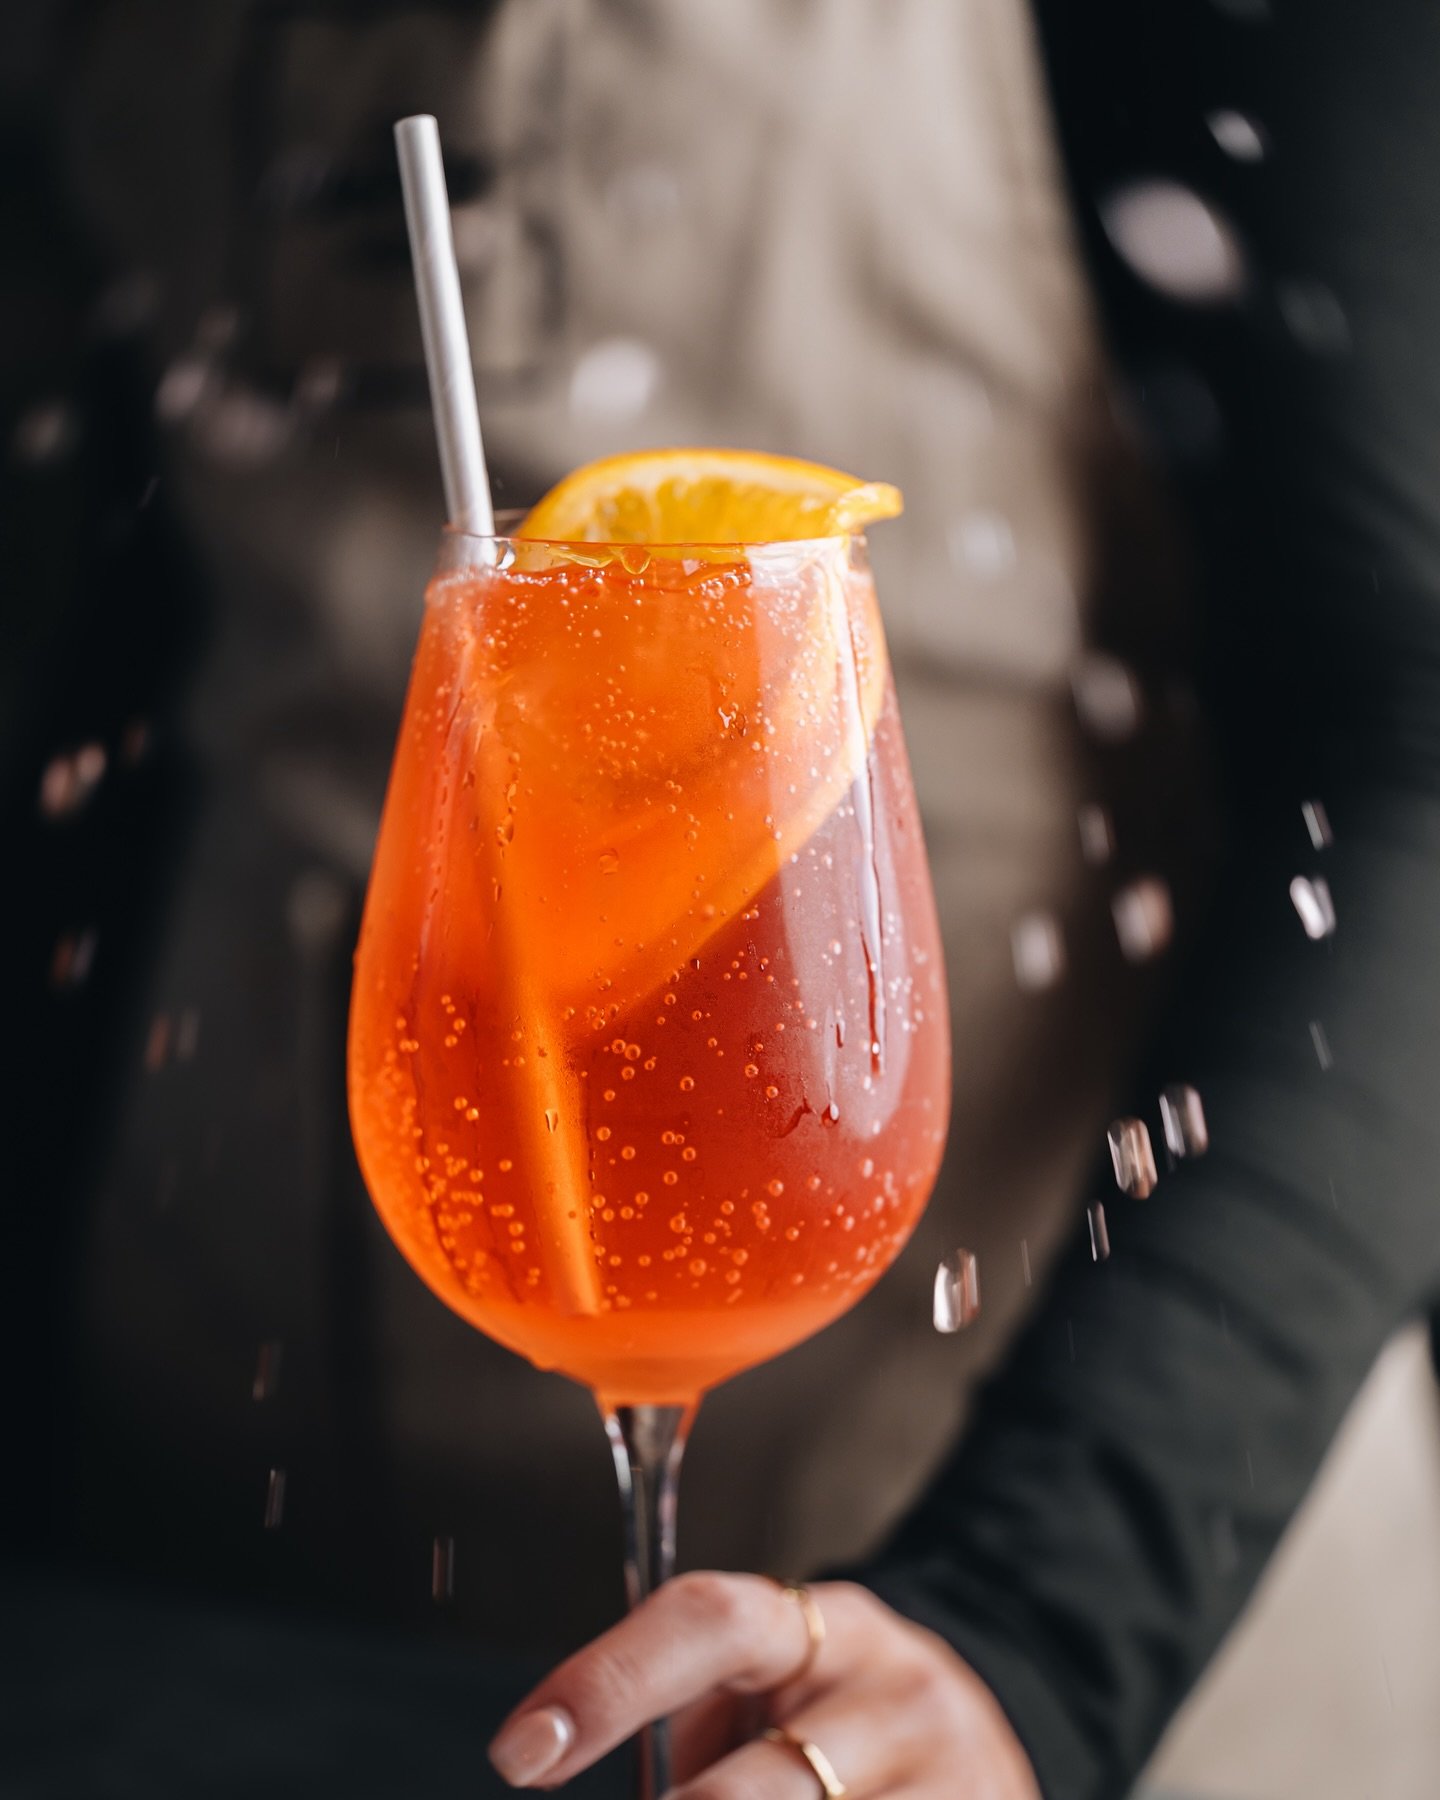 The long weekend is here and we are open for cocktails and delicious small plates, steak, pasta dishes and wine in Brigg tonight and tomorrow night so make sure your tables are booked and we&rsquo;ll see you later for an Aperol or two 🍊🥂